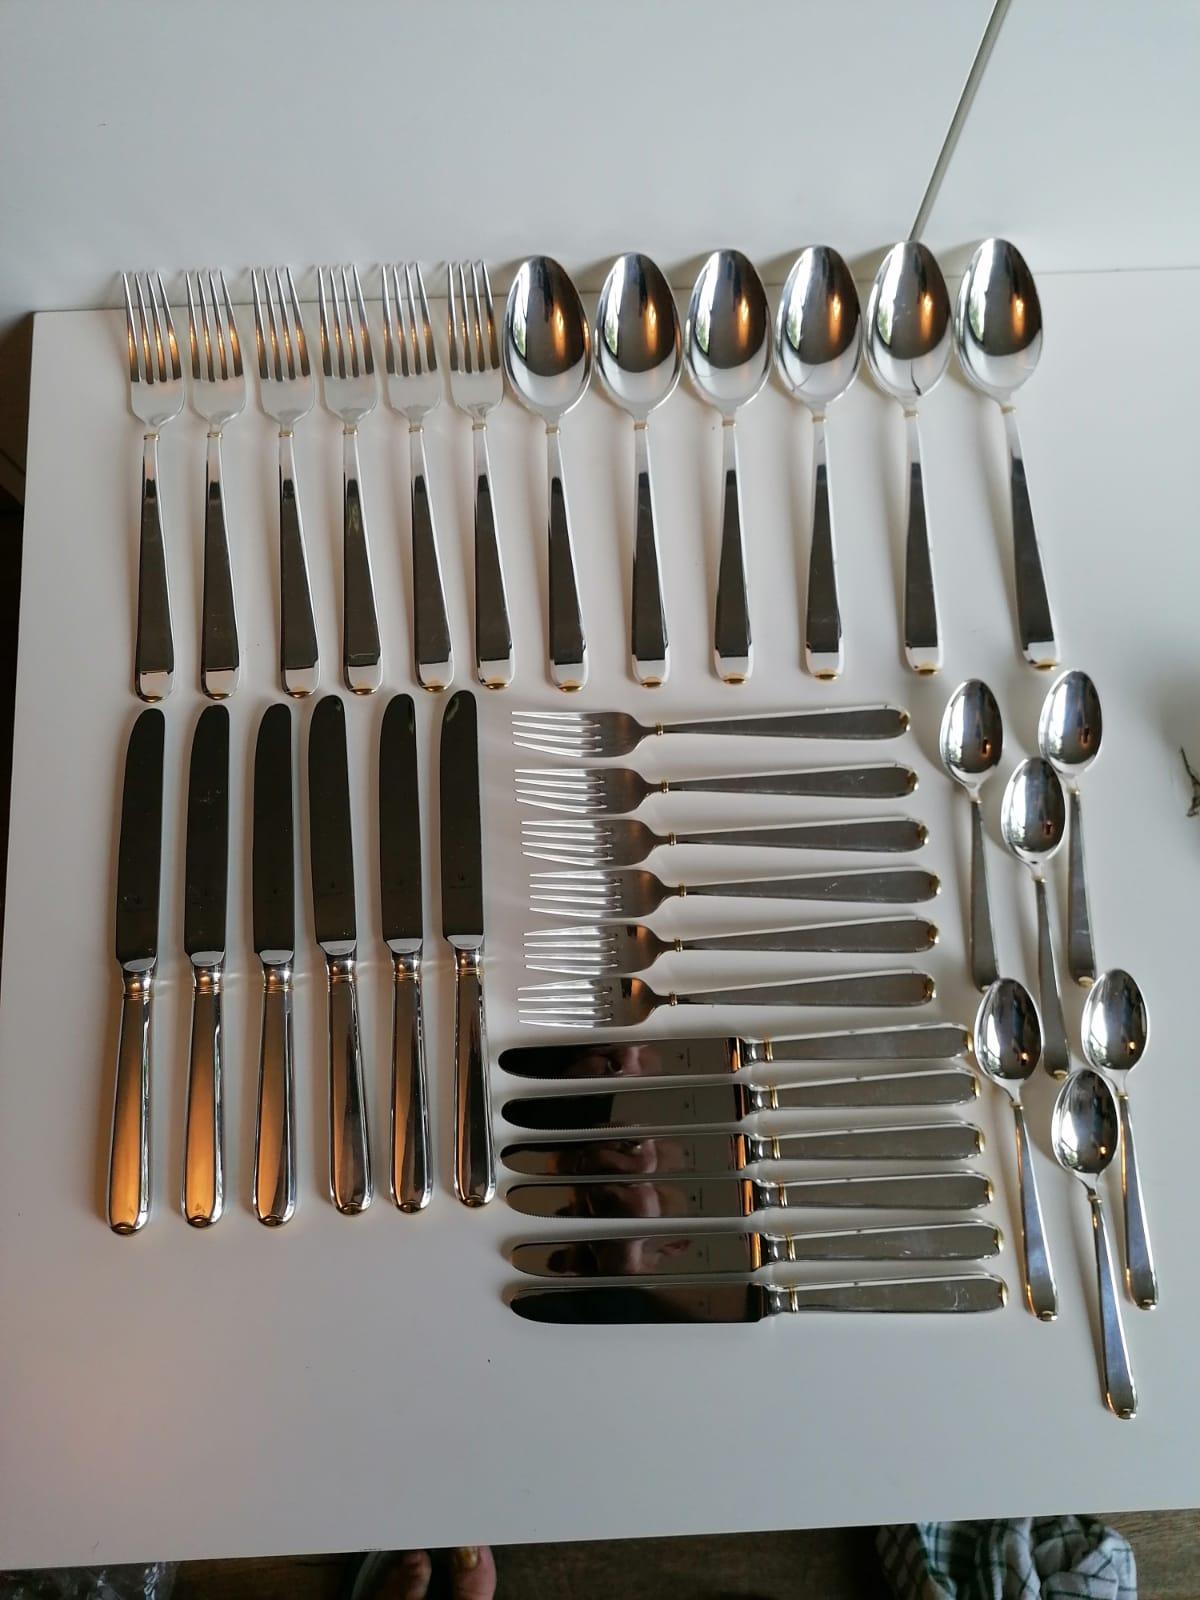 German Cutlery by Wilkens & Söhne Bremen. Beautiful and hard-to-find cutlery made of chrome-plated stainless steel. A set of 36 pieces in an excelent condition.
 